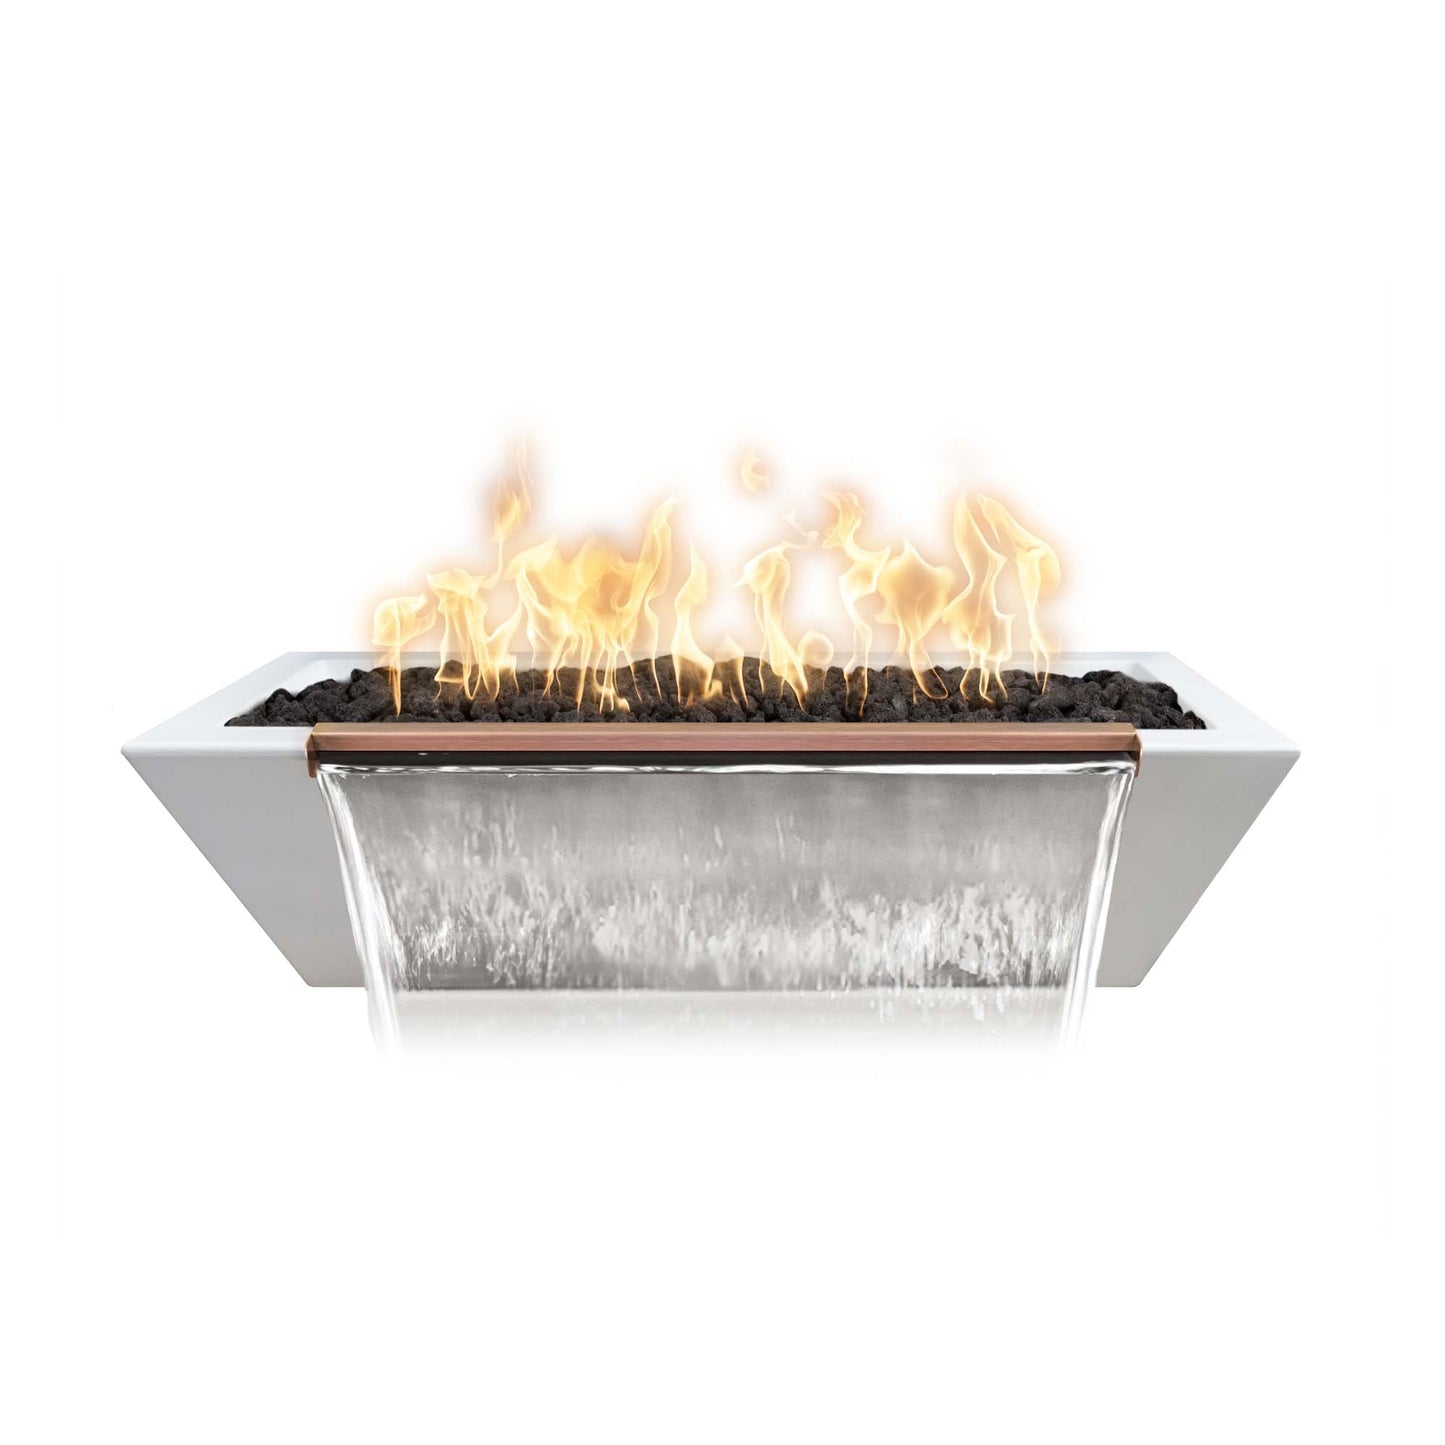 The Outdoor Plus Linear Maya 60" Rustic White GFRC Concrete Liquid Propane Fire & Water Bowl with Match Lit Ignition